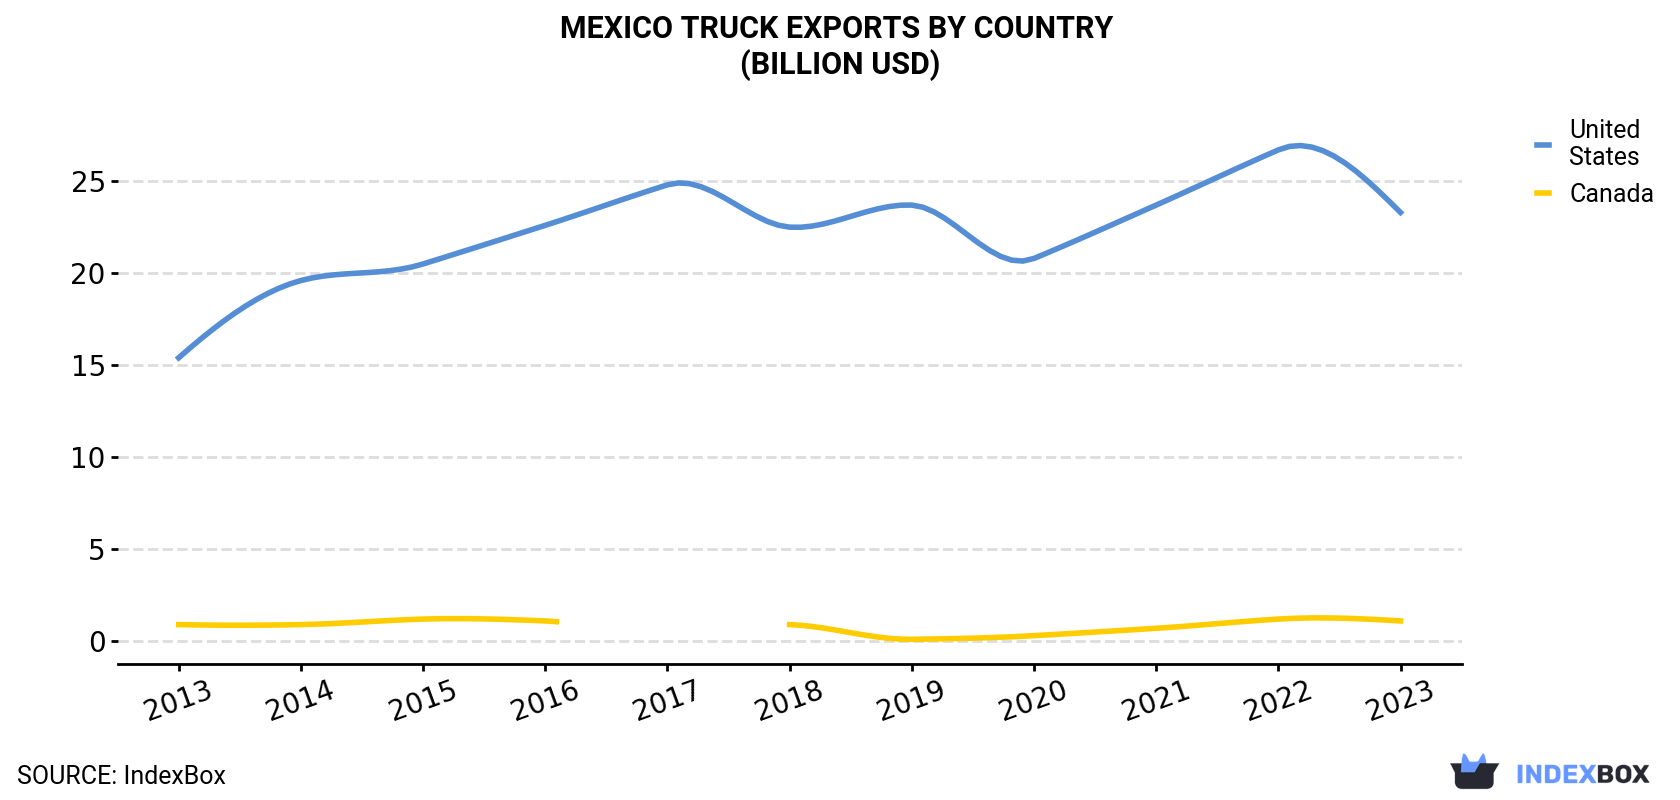 Mexico Truck Exports By Country (Billion USD)